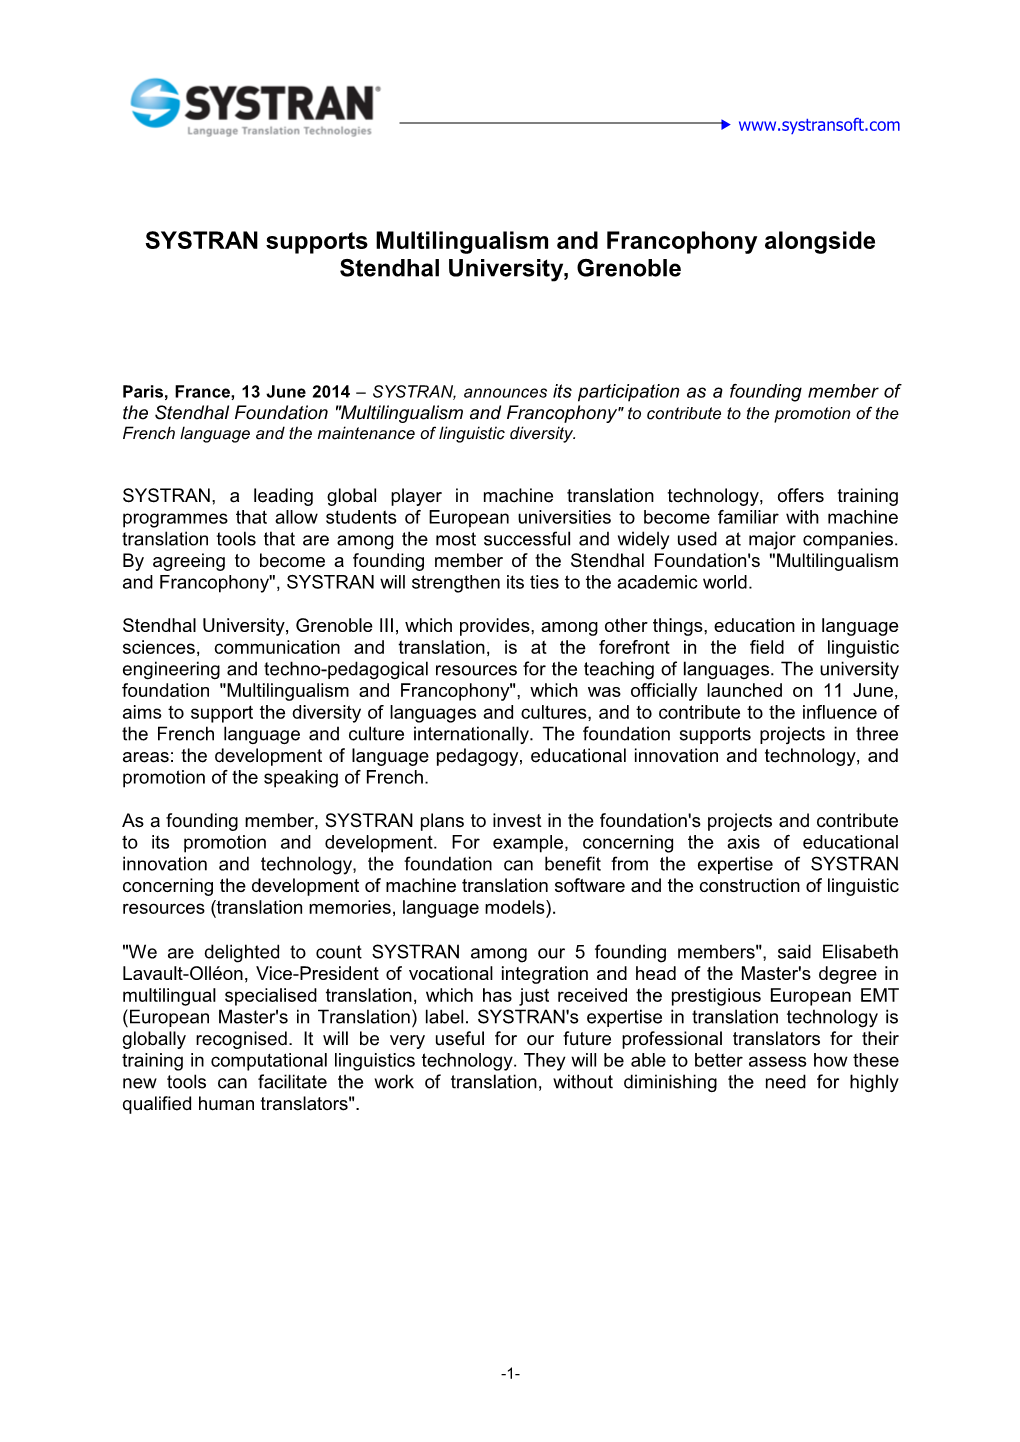 SYSTRAN Supports Multilingualism and Francophony Alongside Stendhal University, Grenoble